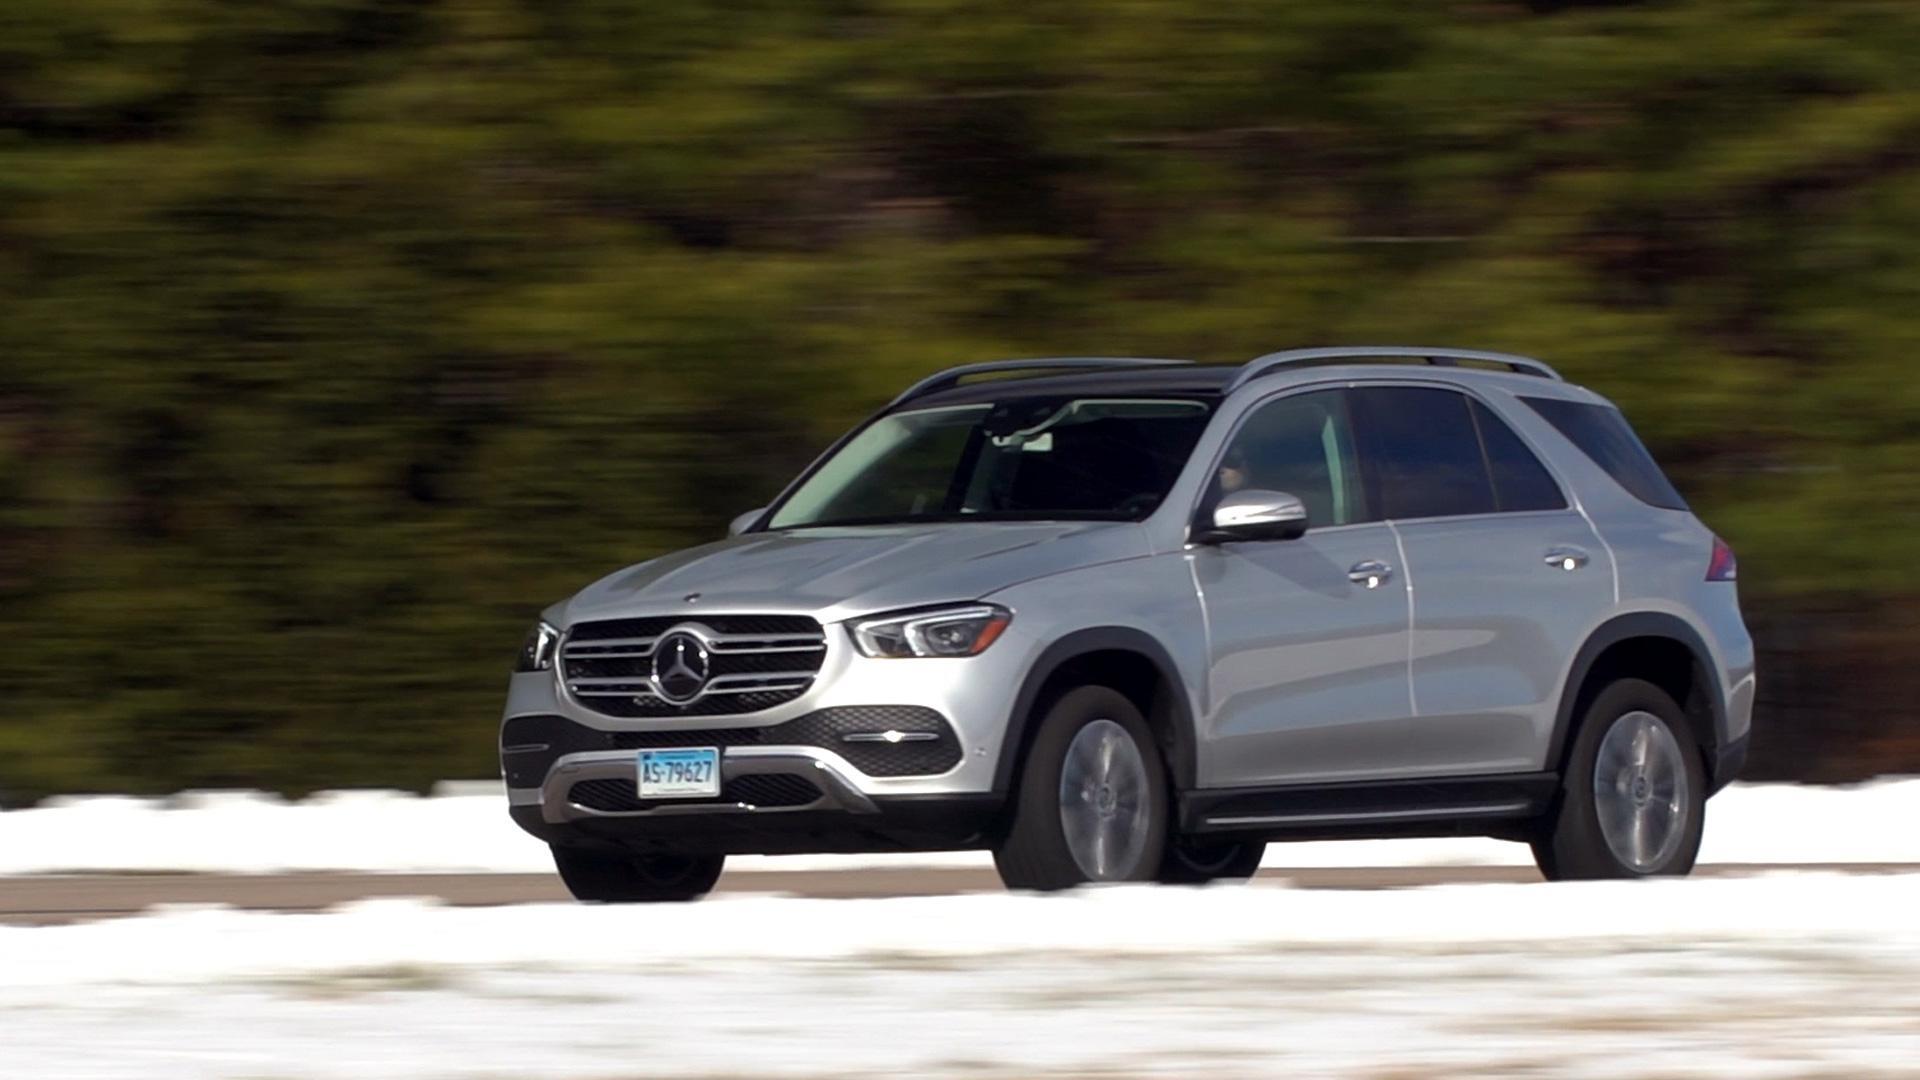 2021 Mercedes-Benz GLE Reviews, Ratings, Prices - Consumer Reports